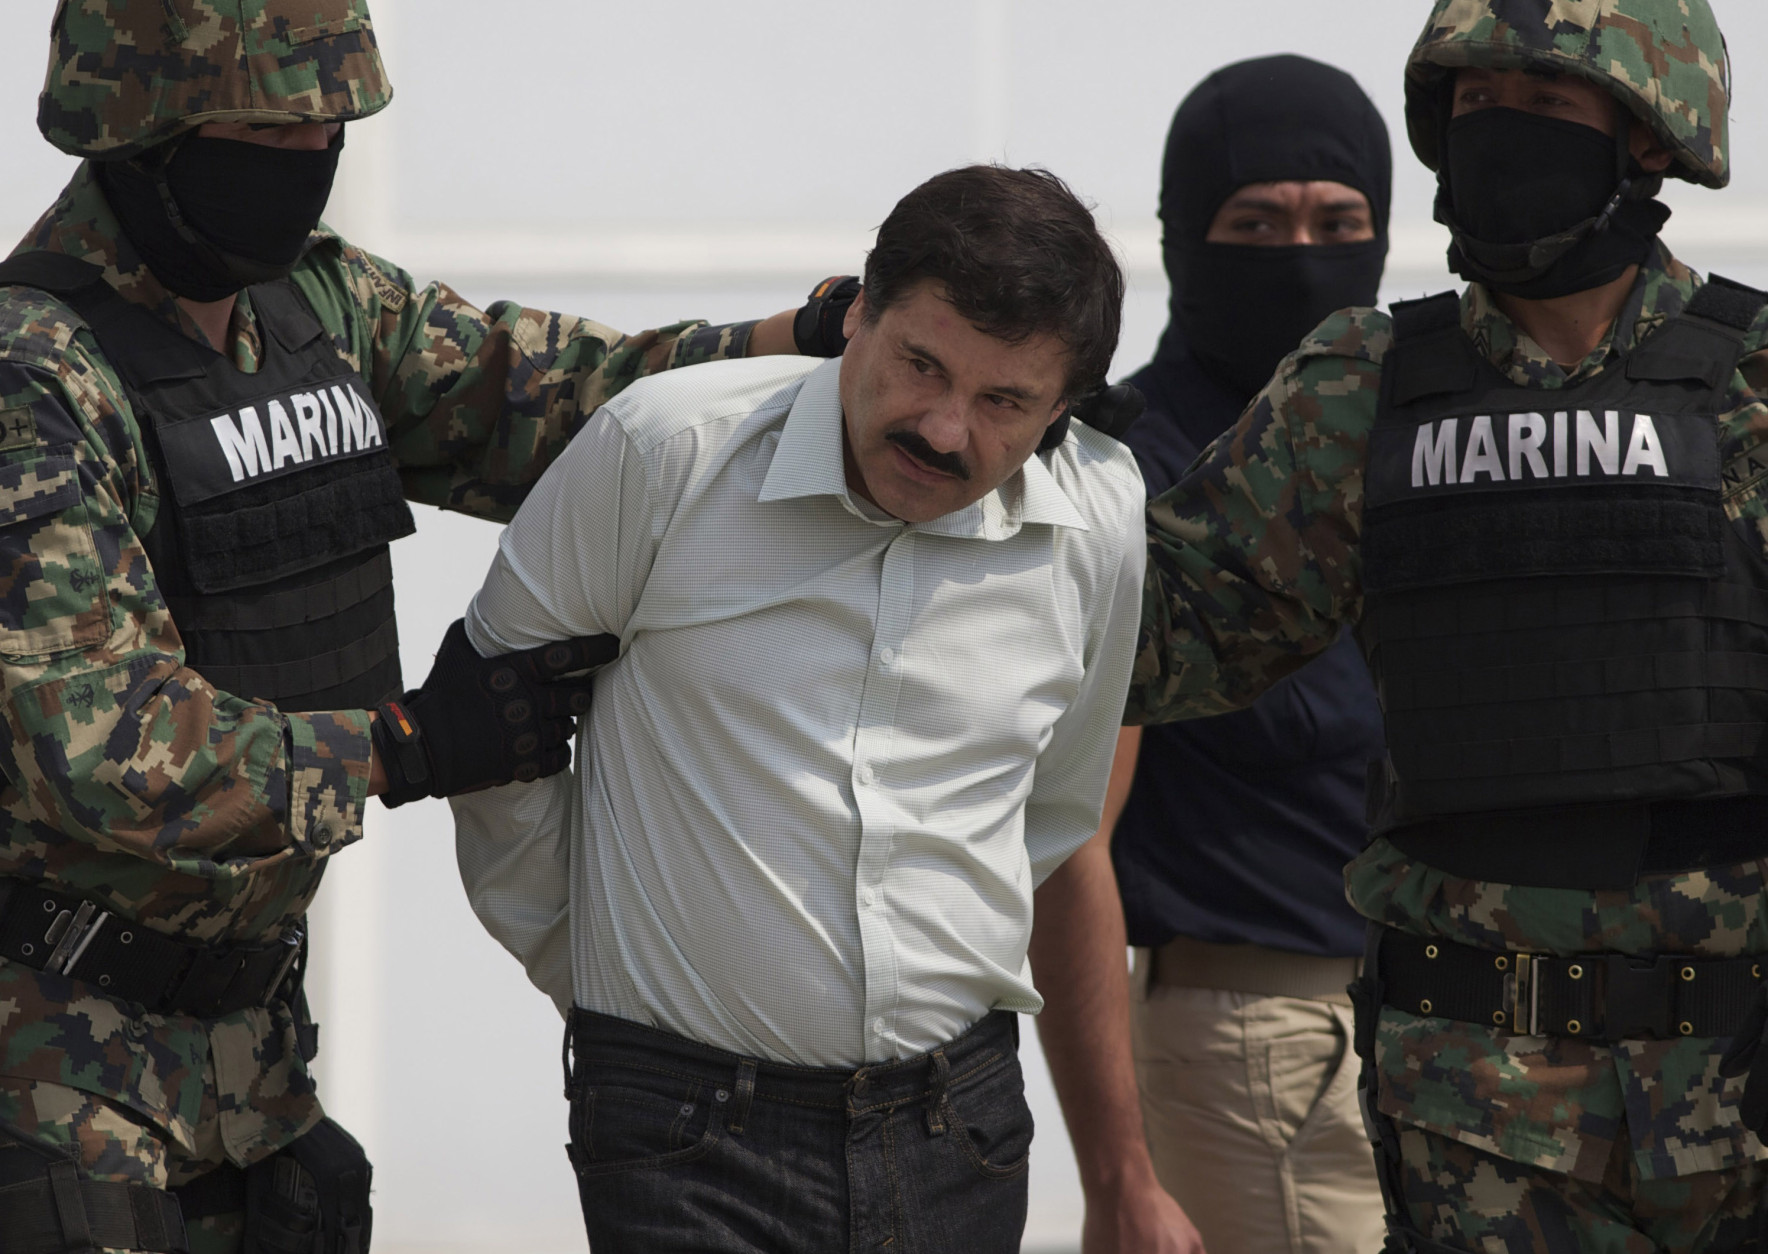 FOR USE AS DESIRED, YEAR END PHOTOS - FILE - In this Saturday, Feb. 22, 2014 photo, Joaquin &quot;El Chapo&quot; Guzman is escorted to a helicopter in handcuffs by Mexican navy marines at a navy hanger in Mexico City, Mexico. Guzman, the head of Mexico's Sinaloa Cartel, was captured alive overnight in the beach resort town of Mazatlan. (AP Photo/Eduardo Verdugo, File)